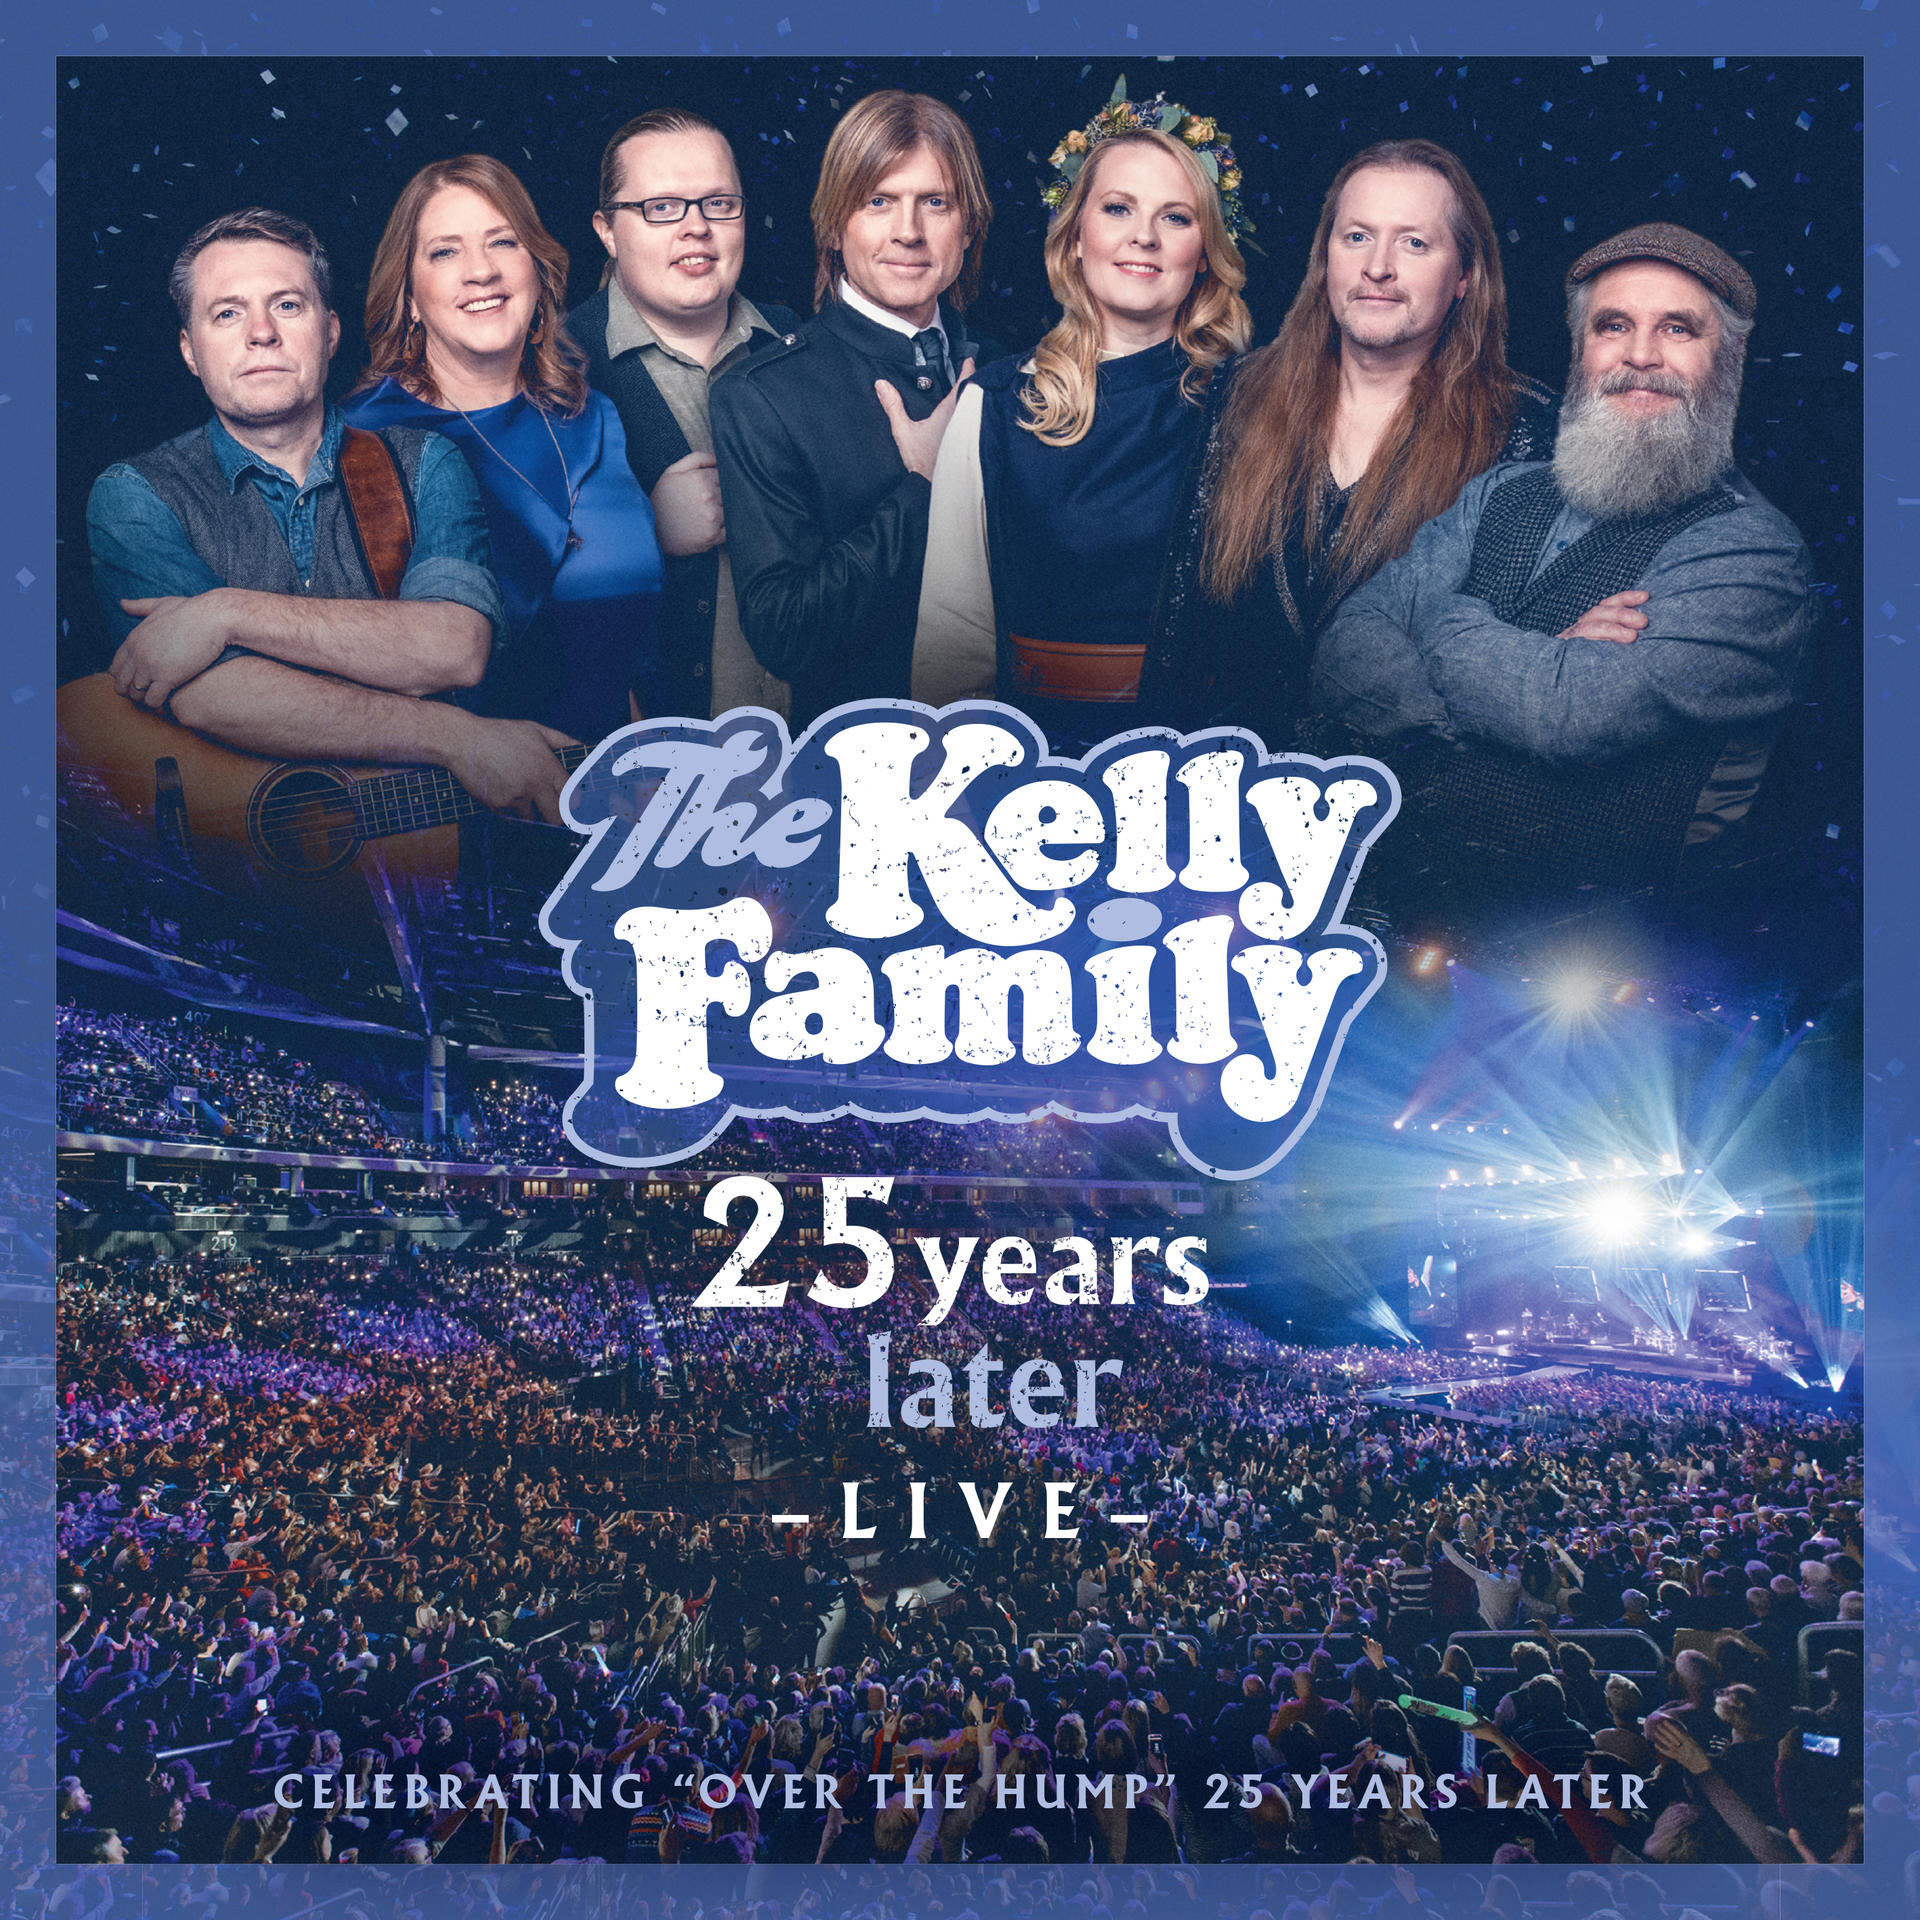 The Kelly 25 Years (Blu-ray) Later-Live Family - 